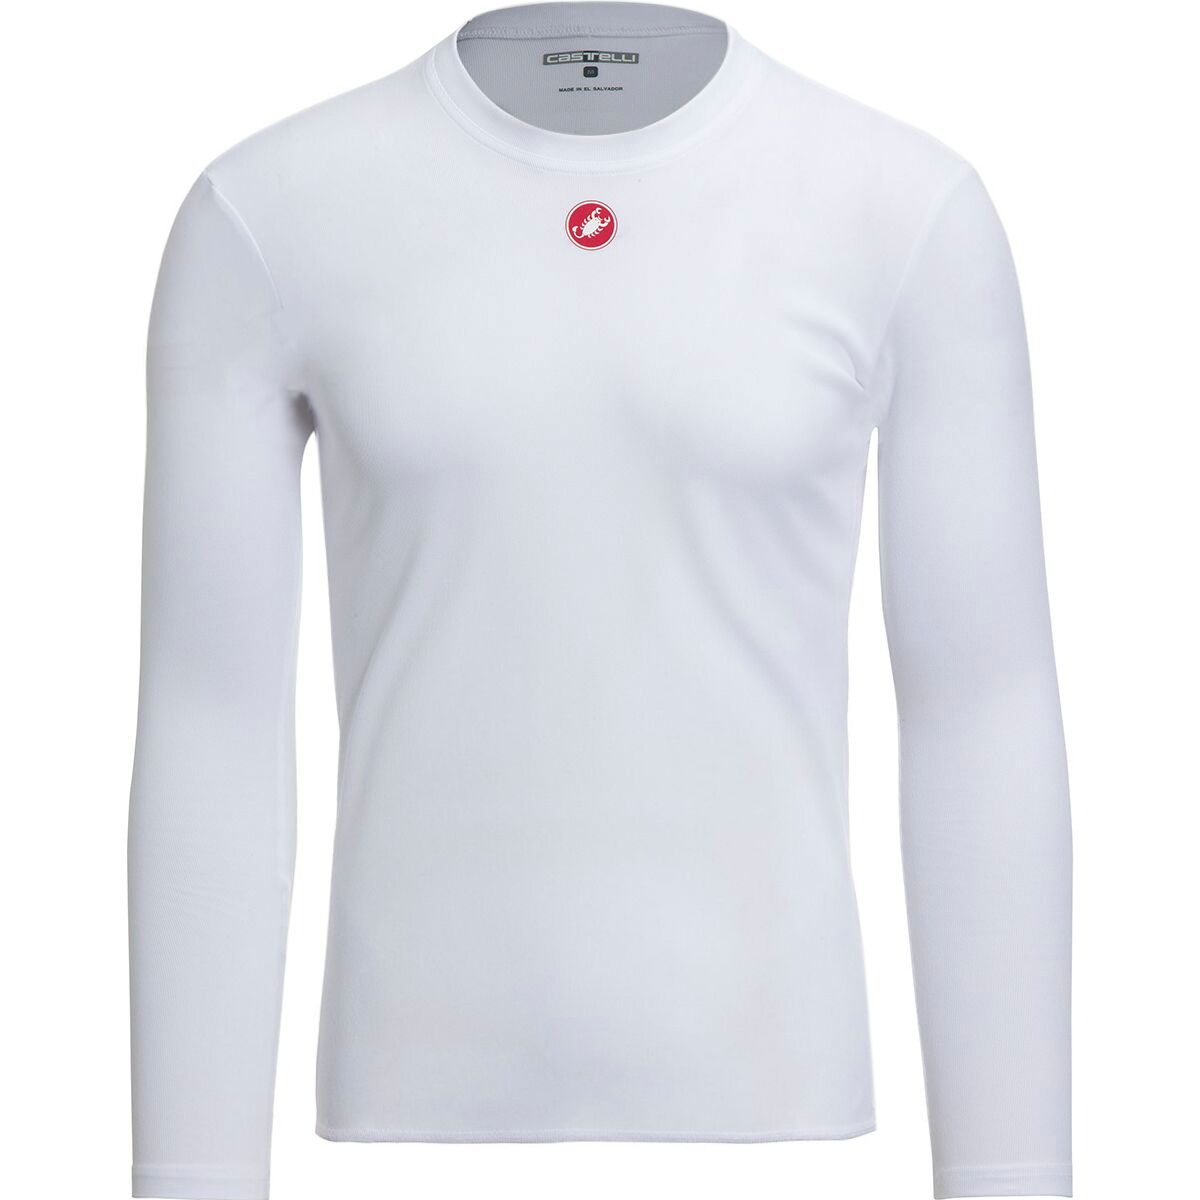 Castelli Prosecco Limited Edition R Long-Sleeve Top - Men's